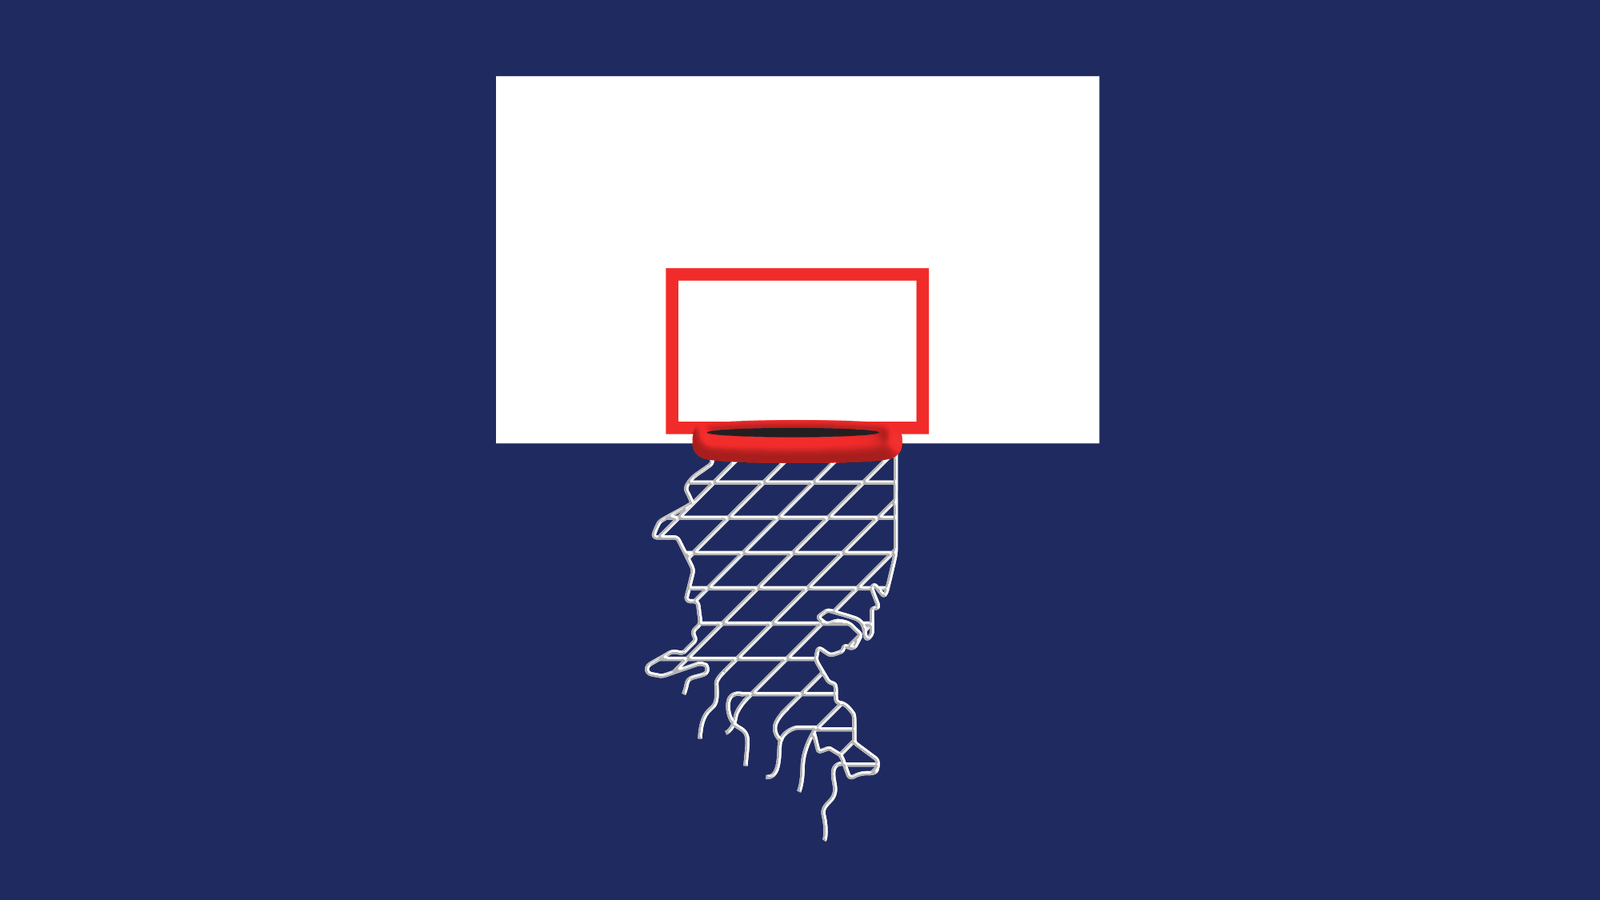 Why It's Good That Americans Don't Dominate Basketball - The Atlantic